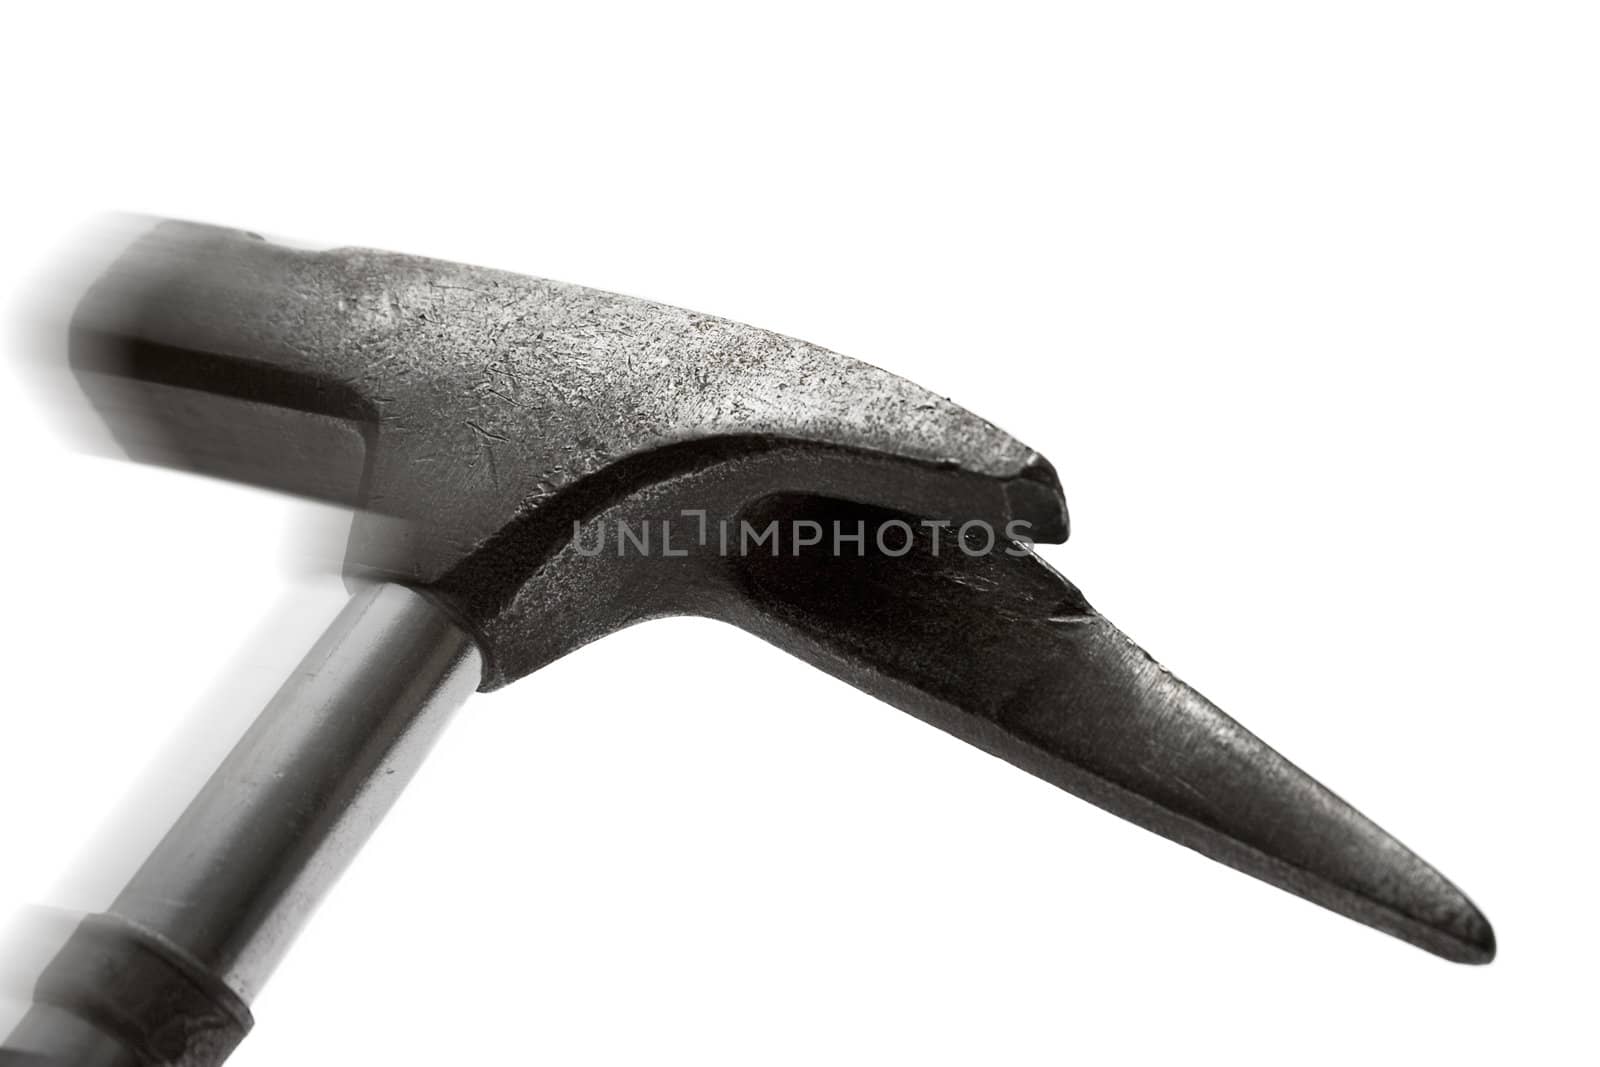 Metal hammer with motion blur. Isolated on a white background.